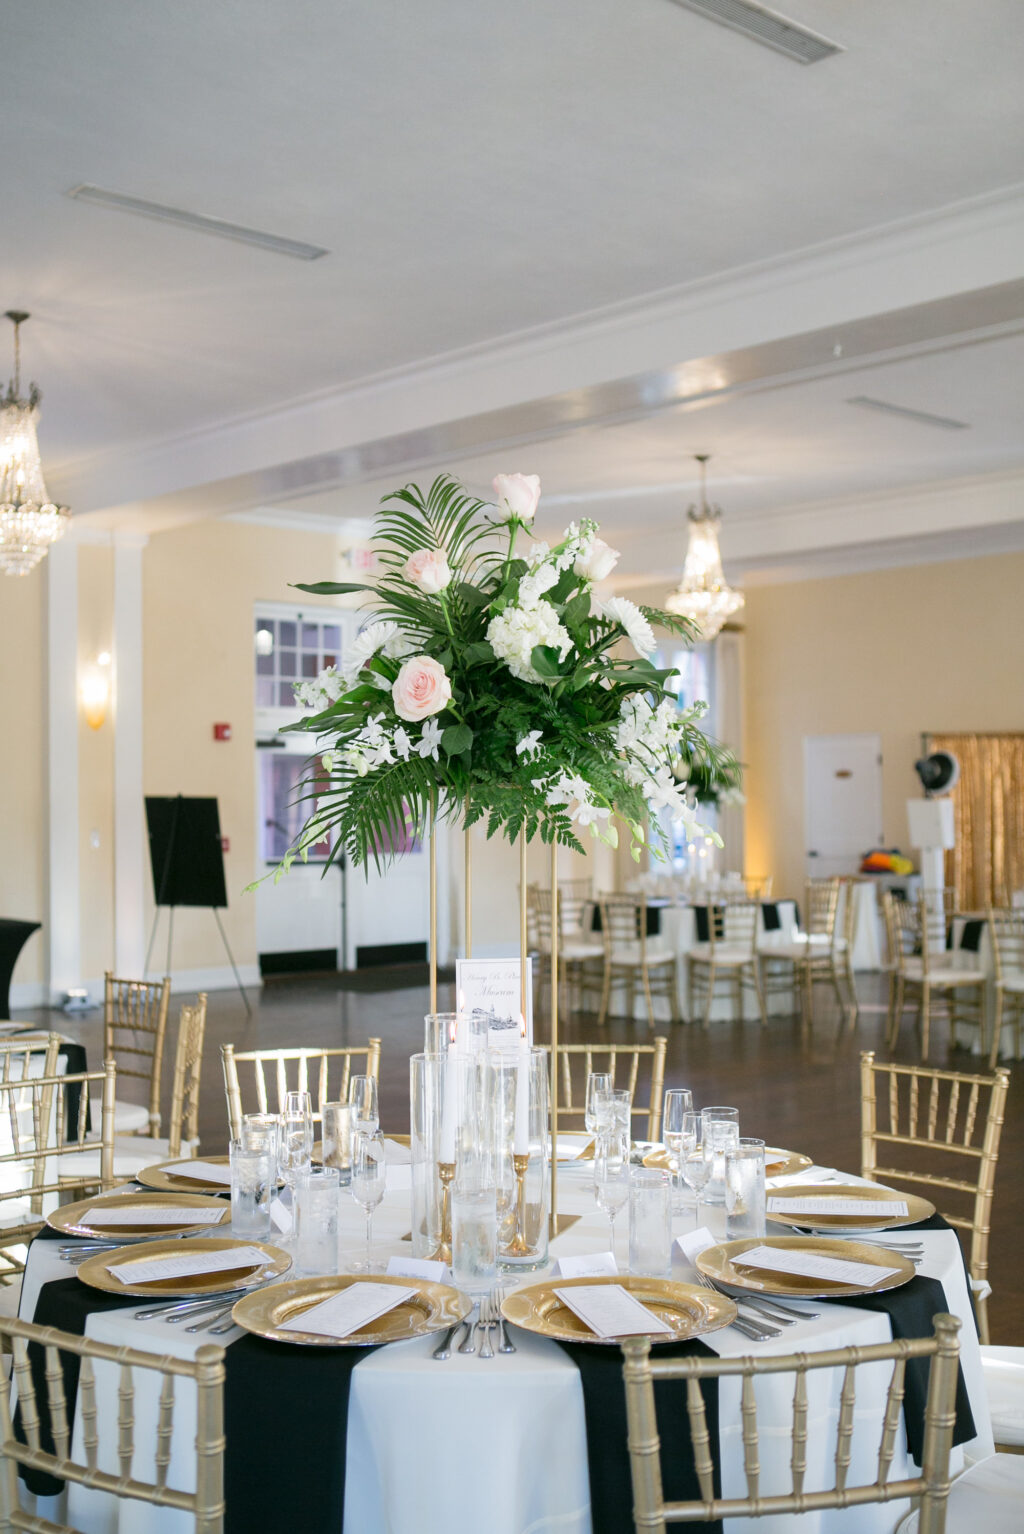 Elegant Tall Gold Flower Stand with White Tropical Flowers and Greenery Inspiration | Gold Chiavari Chairs | Ivory and Black Linens with Gold Chargers and Silver Flatware Wedding Reception Table Setting Ideas | Tampa Bay Rentals A Chair Affair